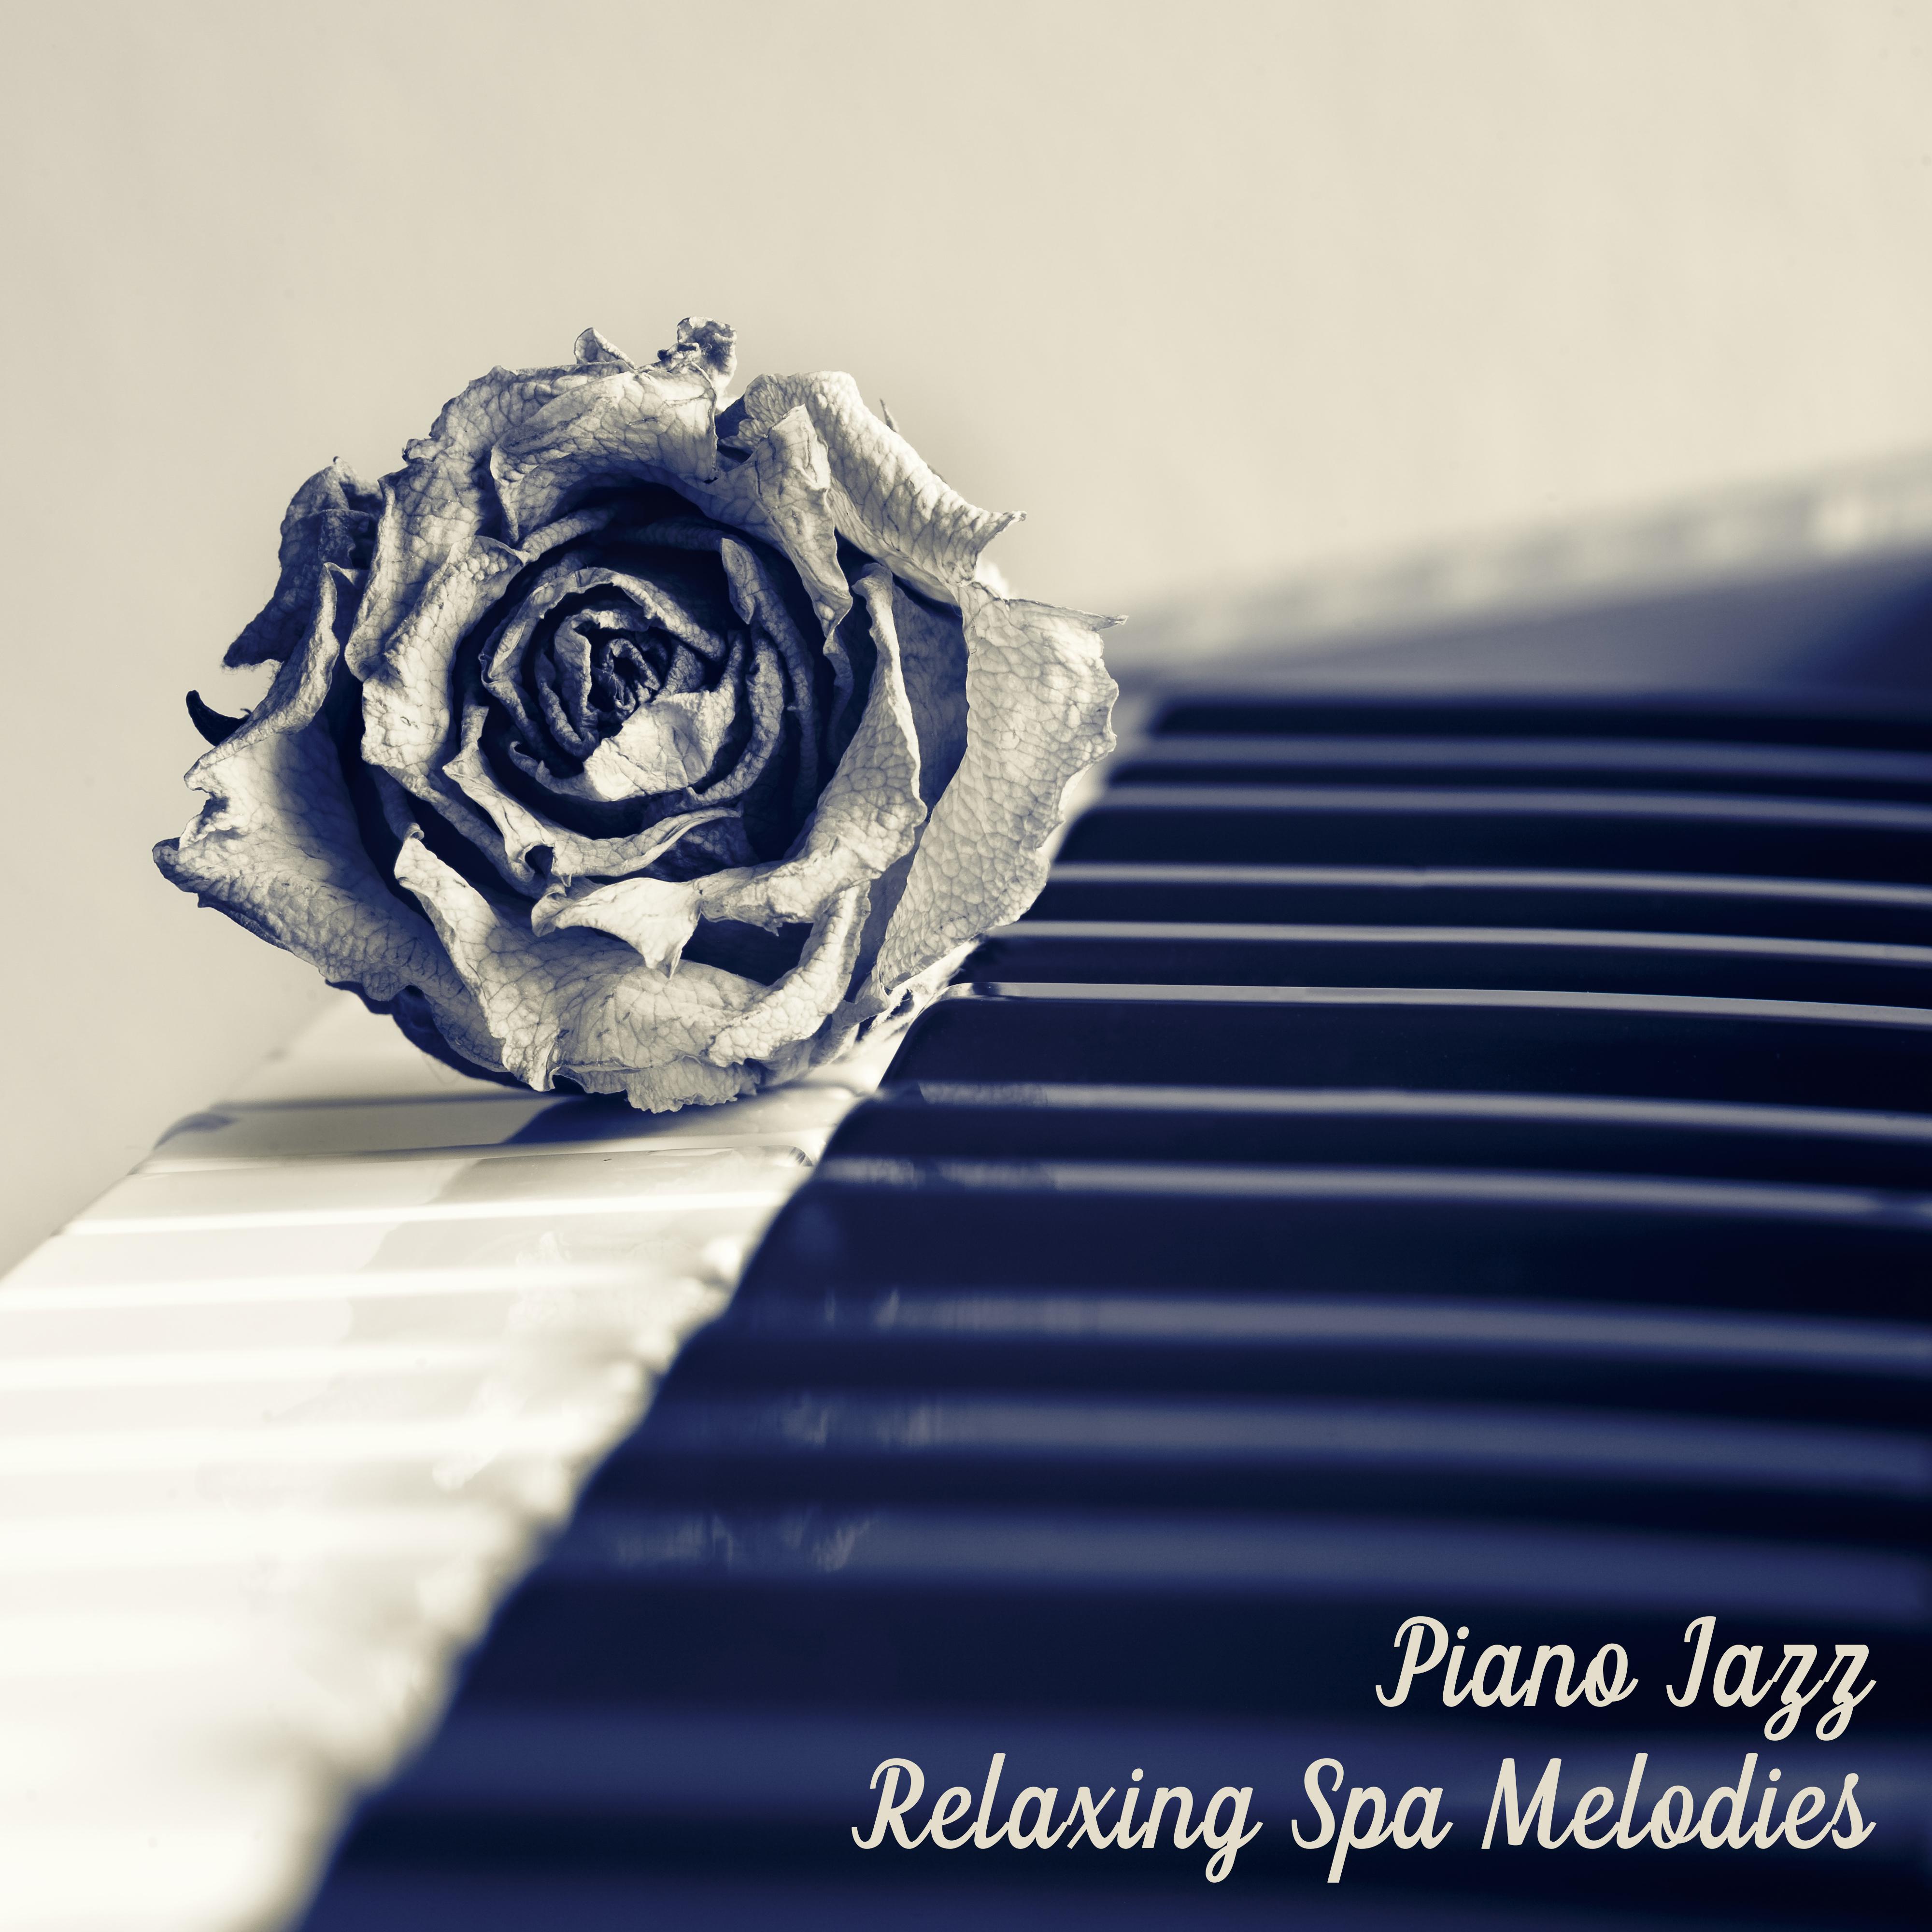 Piano Jazz Relaxing Spa Melodies